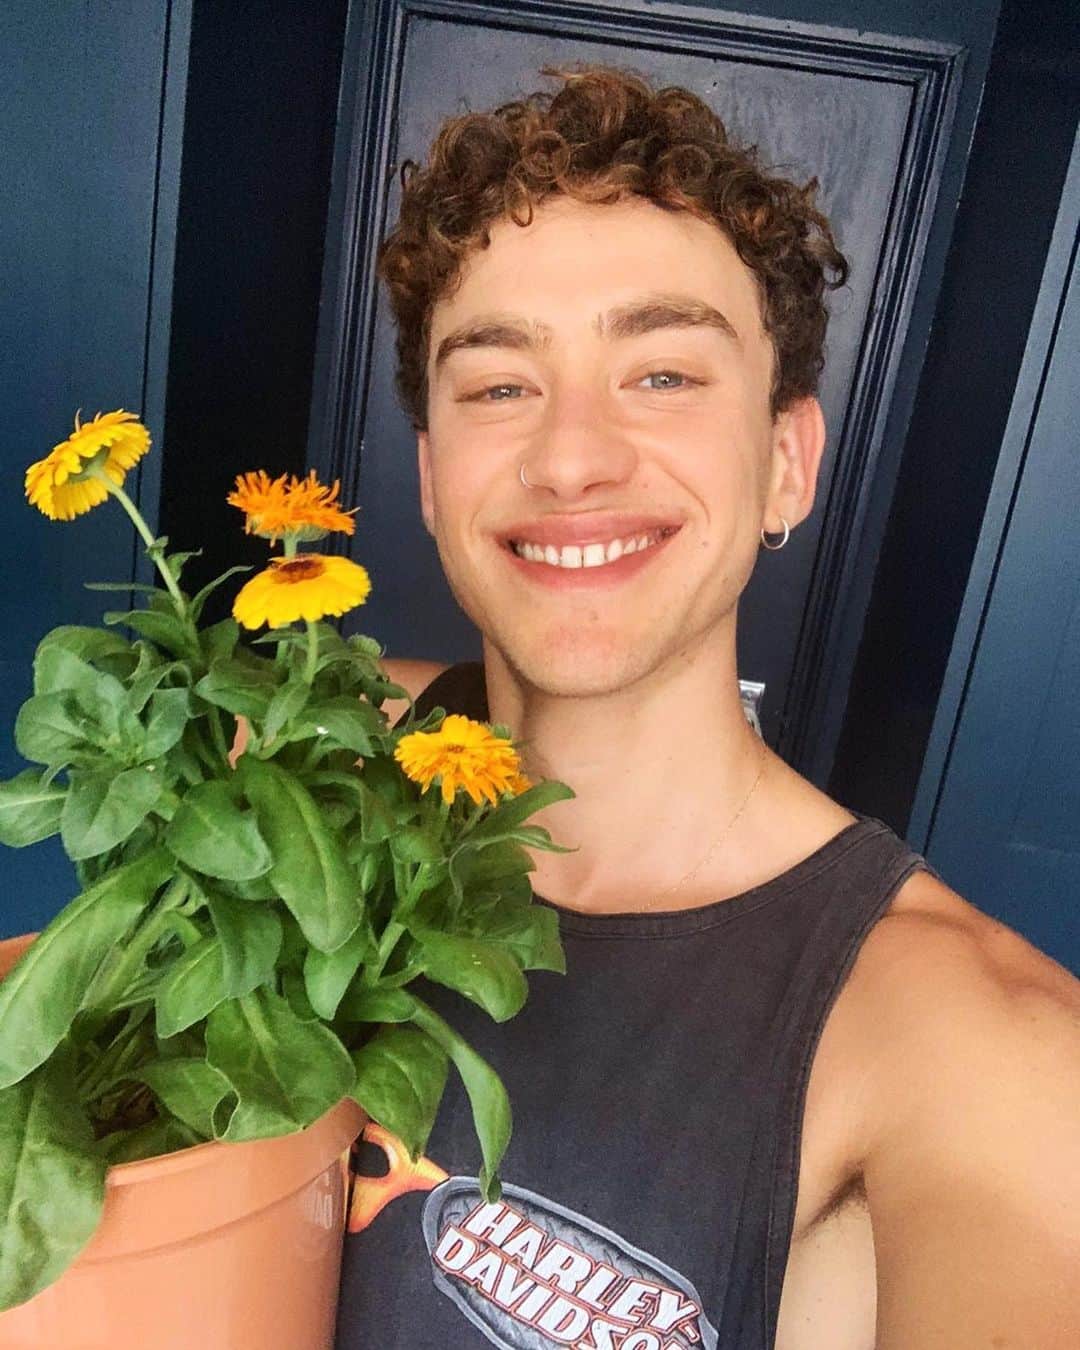 YEARS & YEARSのインスタグラム：「How’s everyone’s bank holiday going? ✨ the plant i’m holding in the selfie is a Calendula, i bought a few at the start of lockdown and now they’re all floweryyyy 🥰 Emre is hanging out with Daphne and Mikey is hanging out with a cute lil goat ! what’s everyone up to today?」